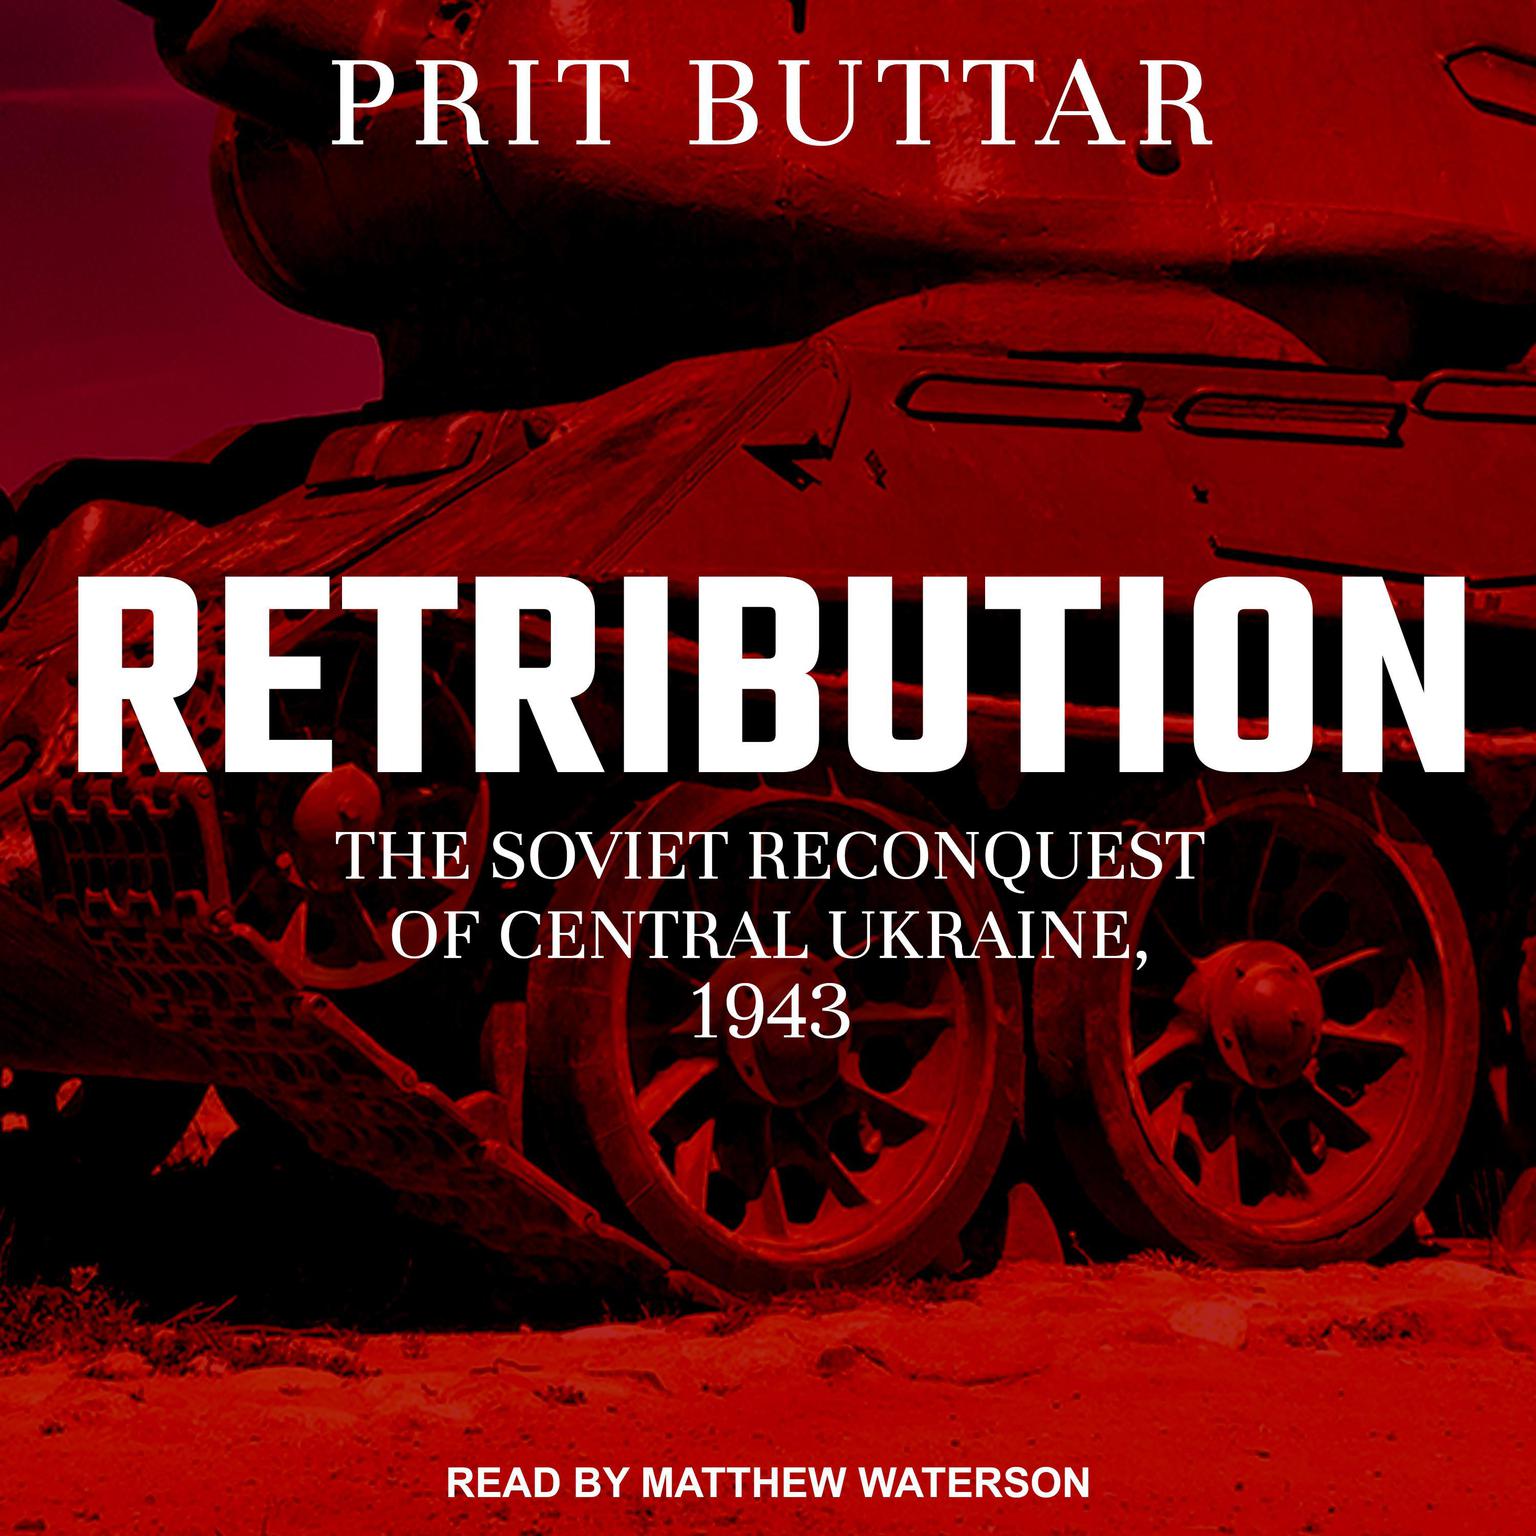 Retribution: The Soviet Reconquest of Central Ukraine, 1943-44 Audiobook, by Prit Buttar